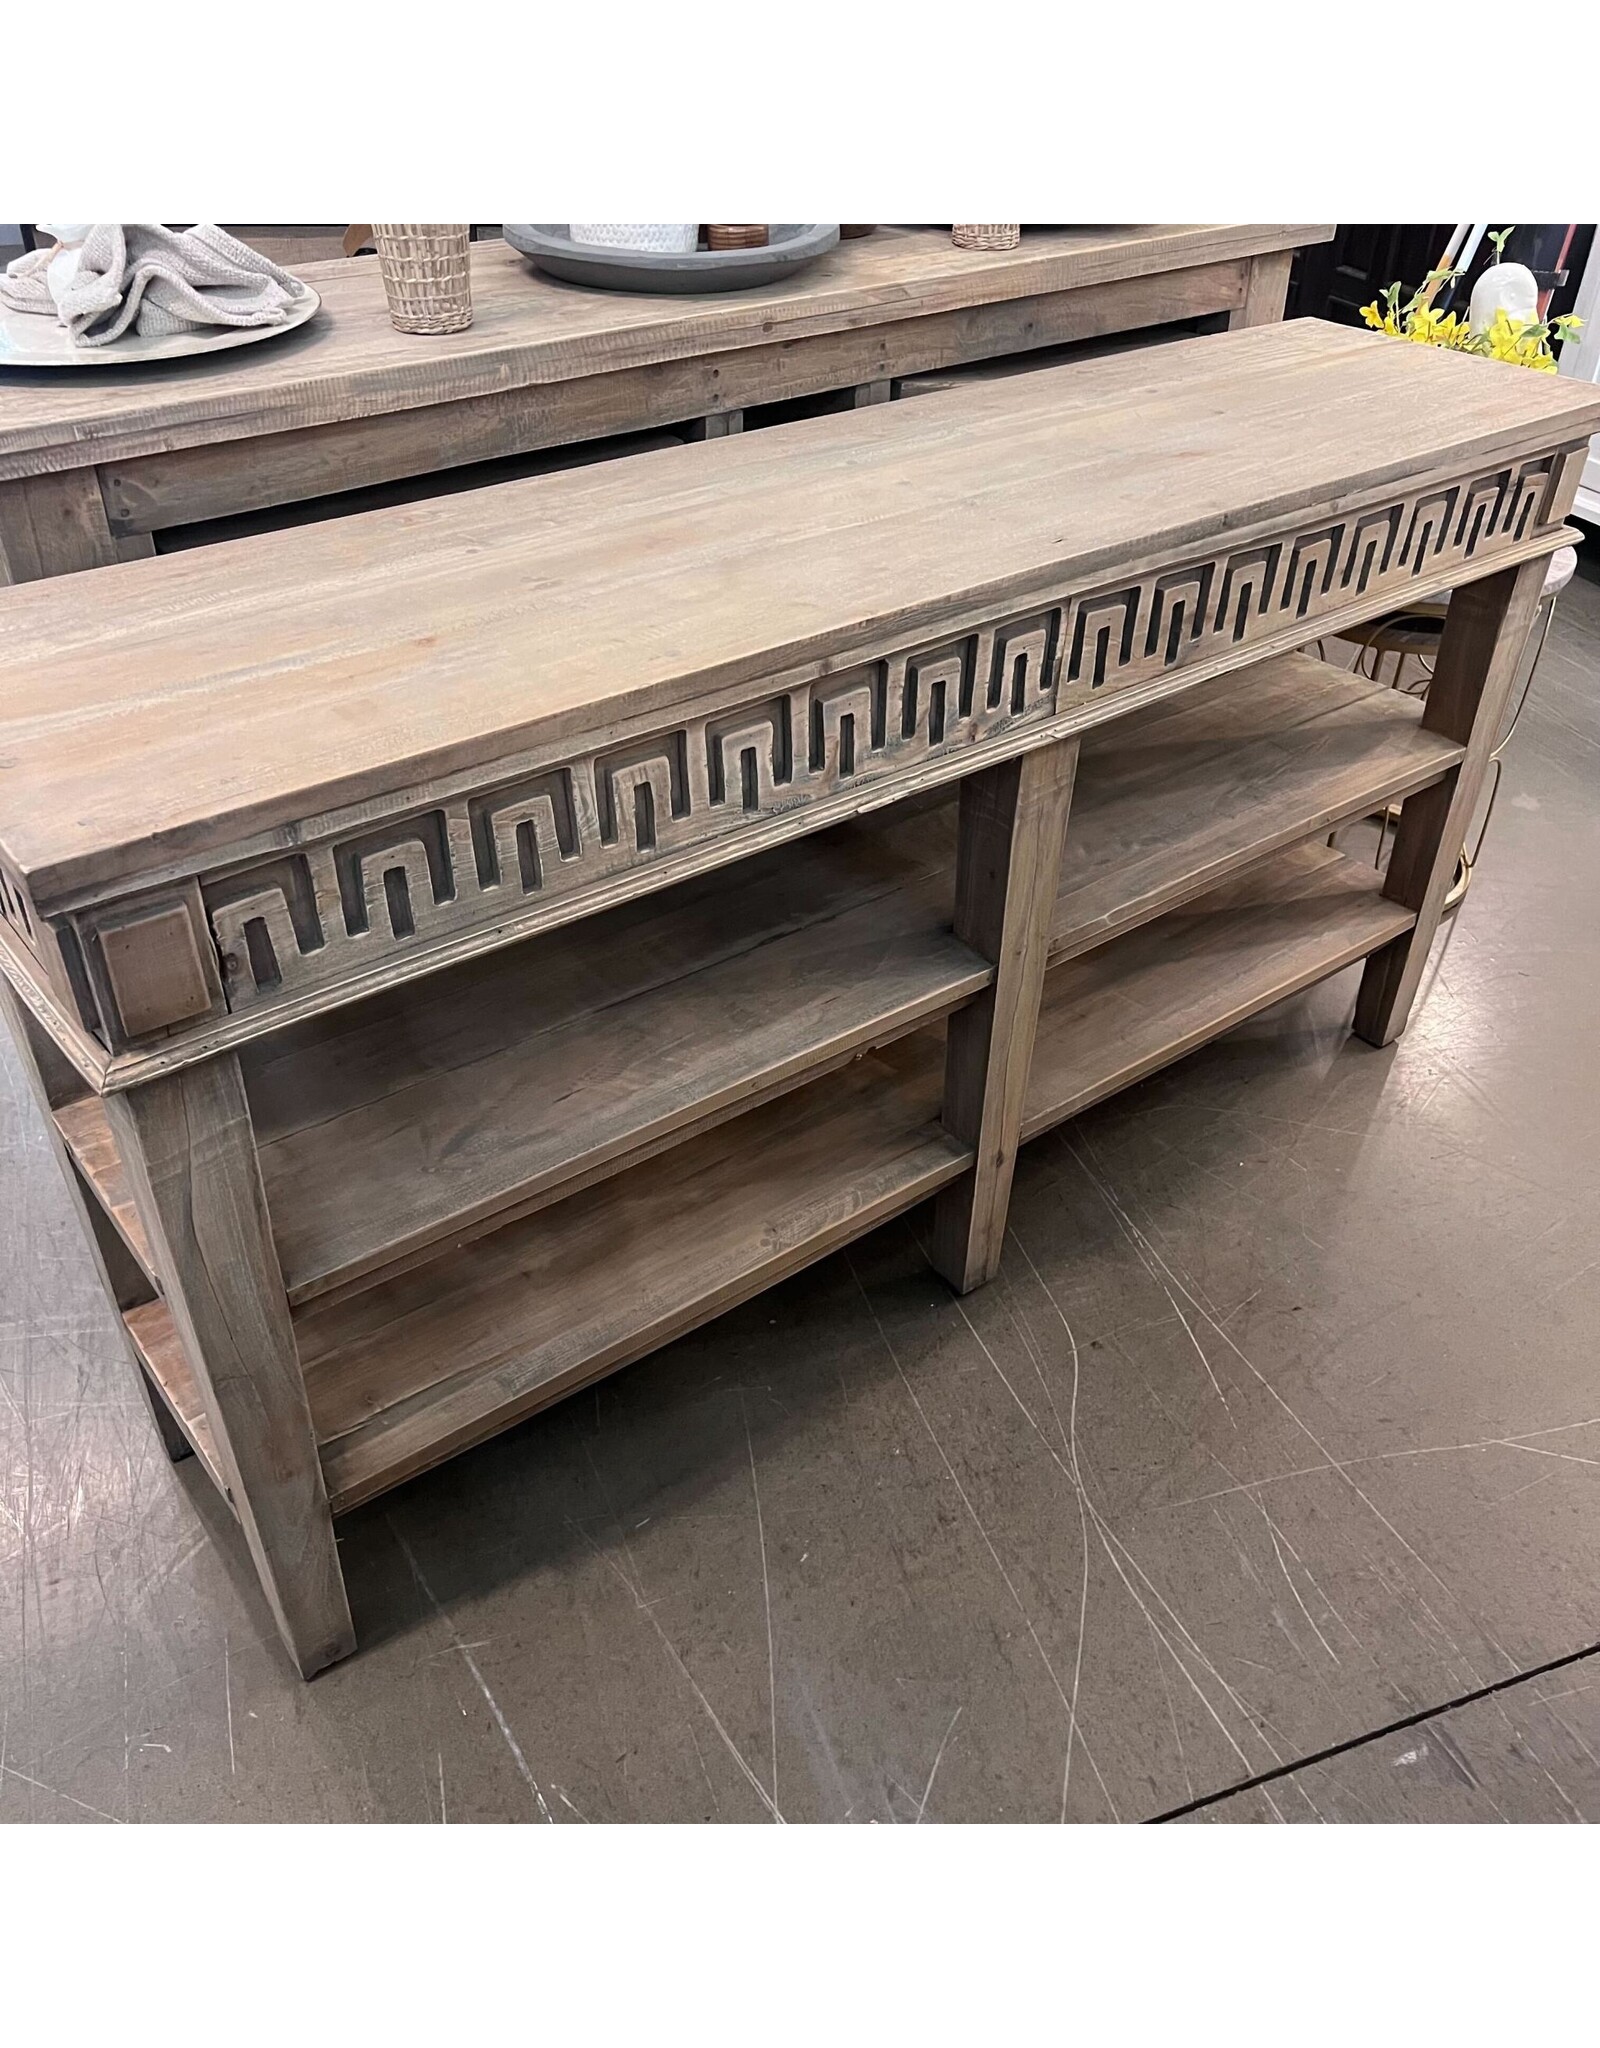 TAB234 Console Table 62.6x15.7x31.2